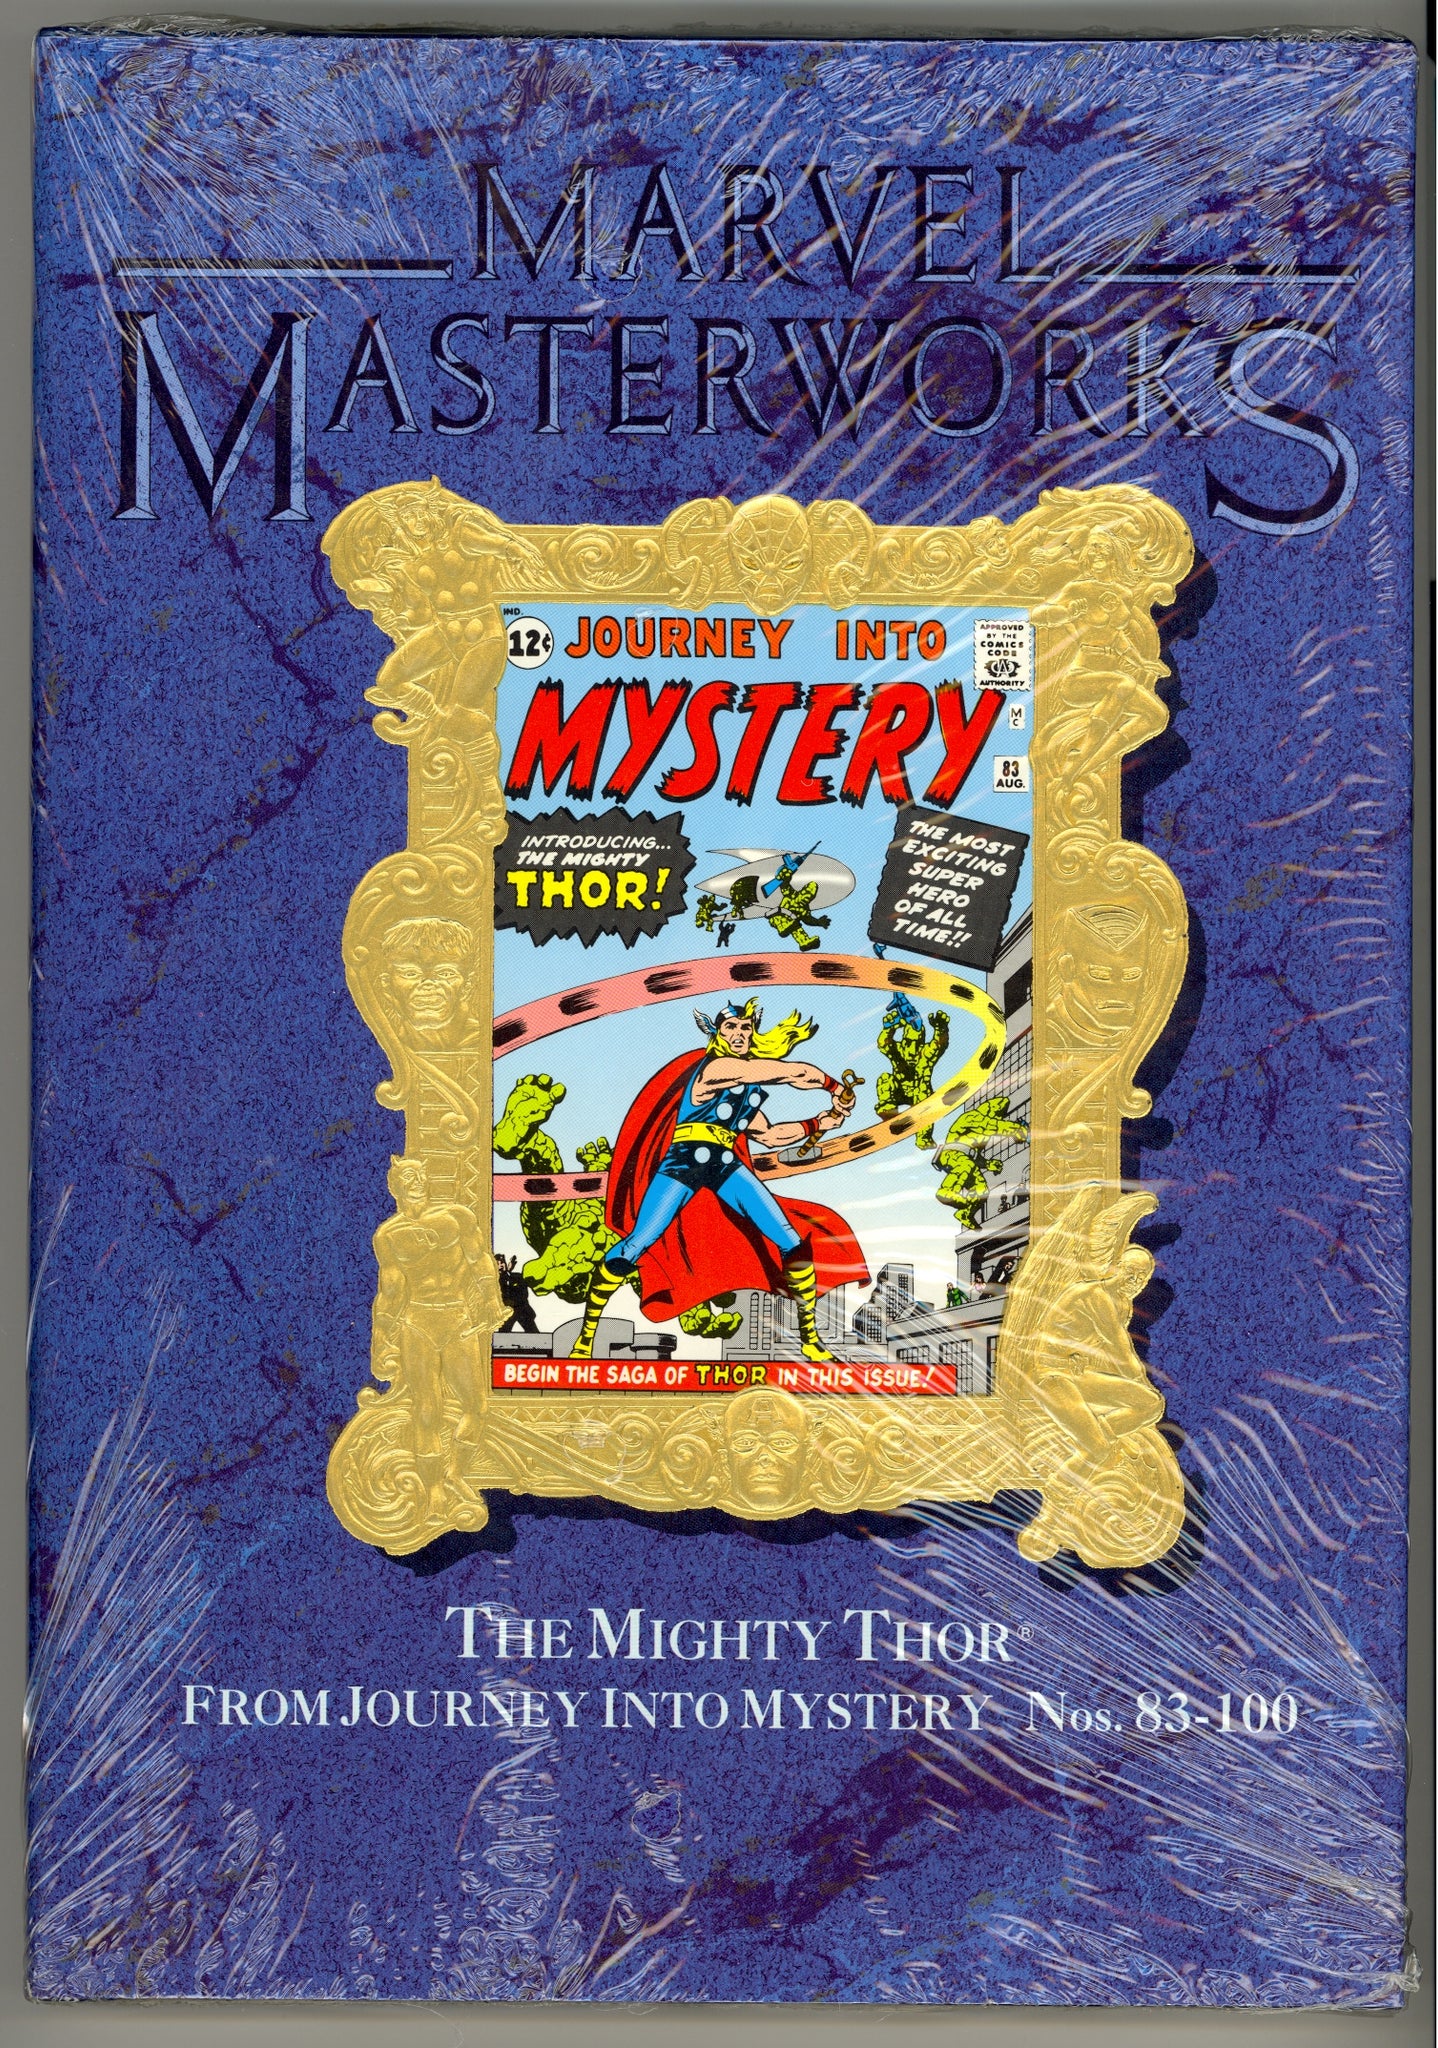 Marvel Masterworks volume 18 Journey Into Mystery issues #83-100, 1st printing, Thor